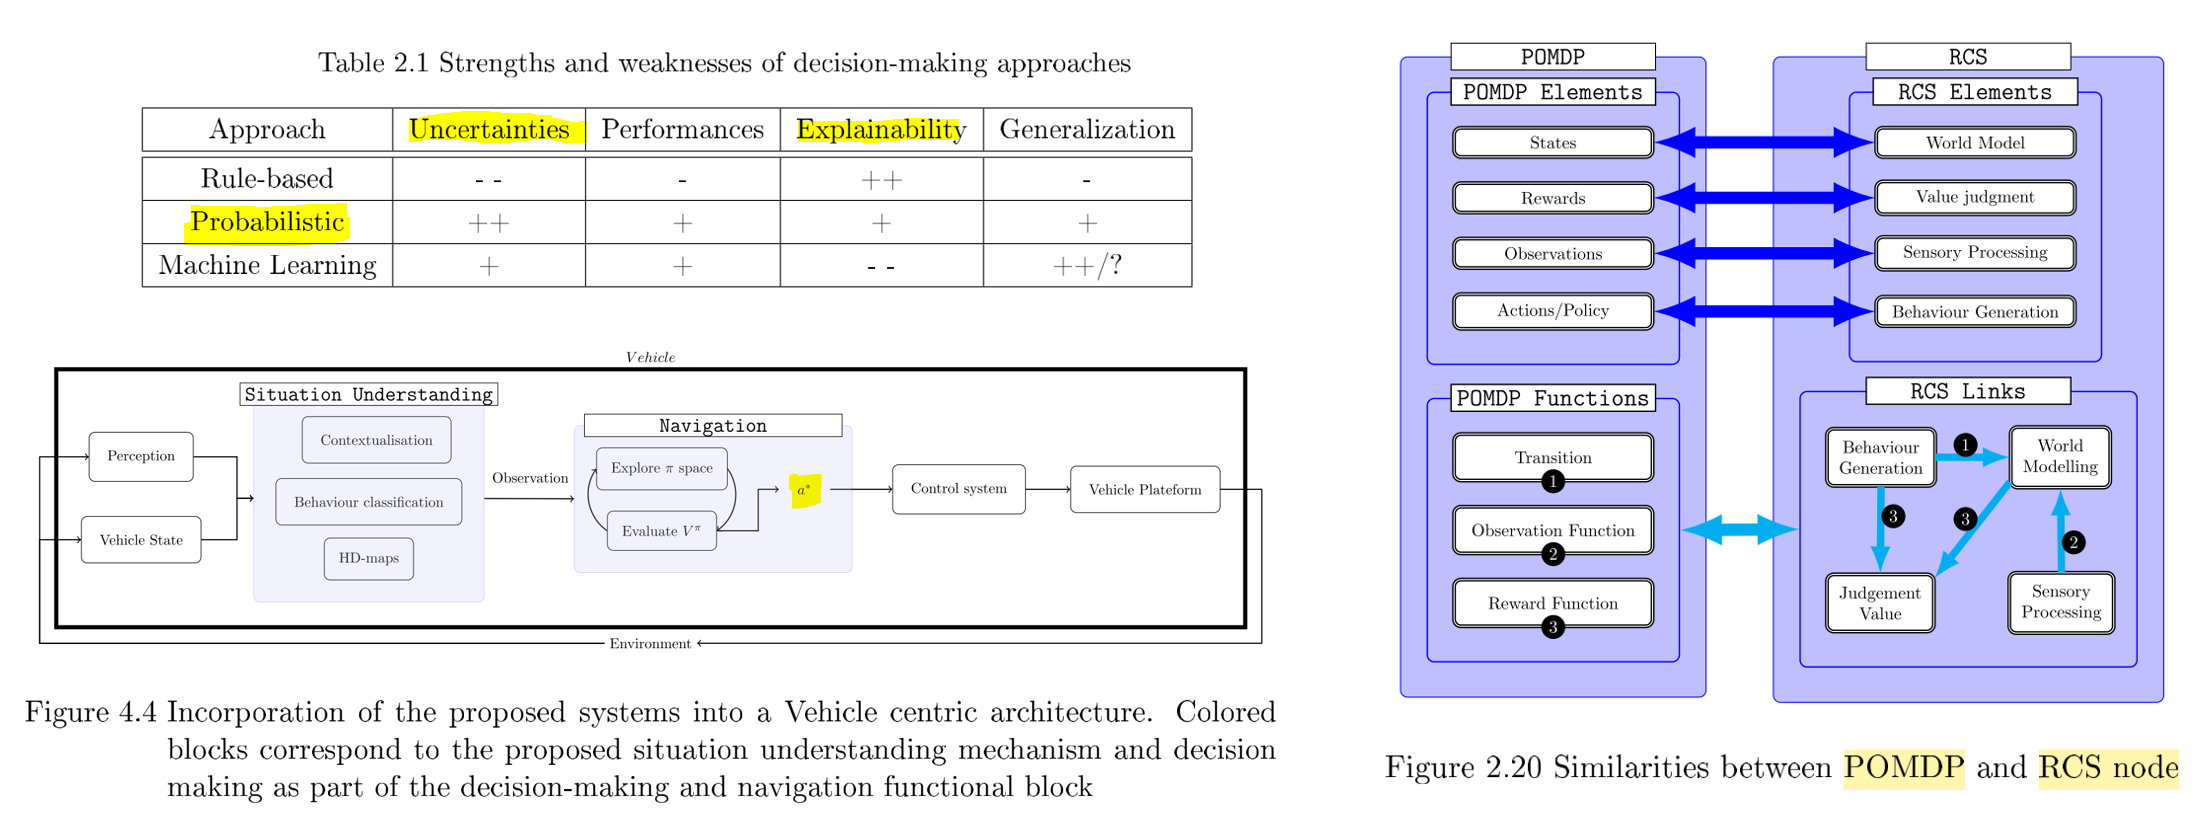 The author prefers probabilistic methods, in order to deal with uncertainties while trying to offer some interpretability. The navigation module outputs a single action to be implemented. Another option would have been to deliver some policy which could be followed for several steps, limiting inconsistent transitions (especially for comfort) and favouring long-horizon reasoning. Source.